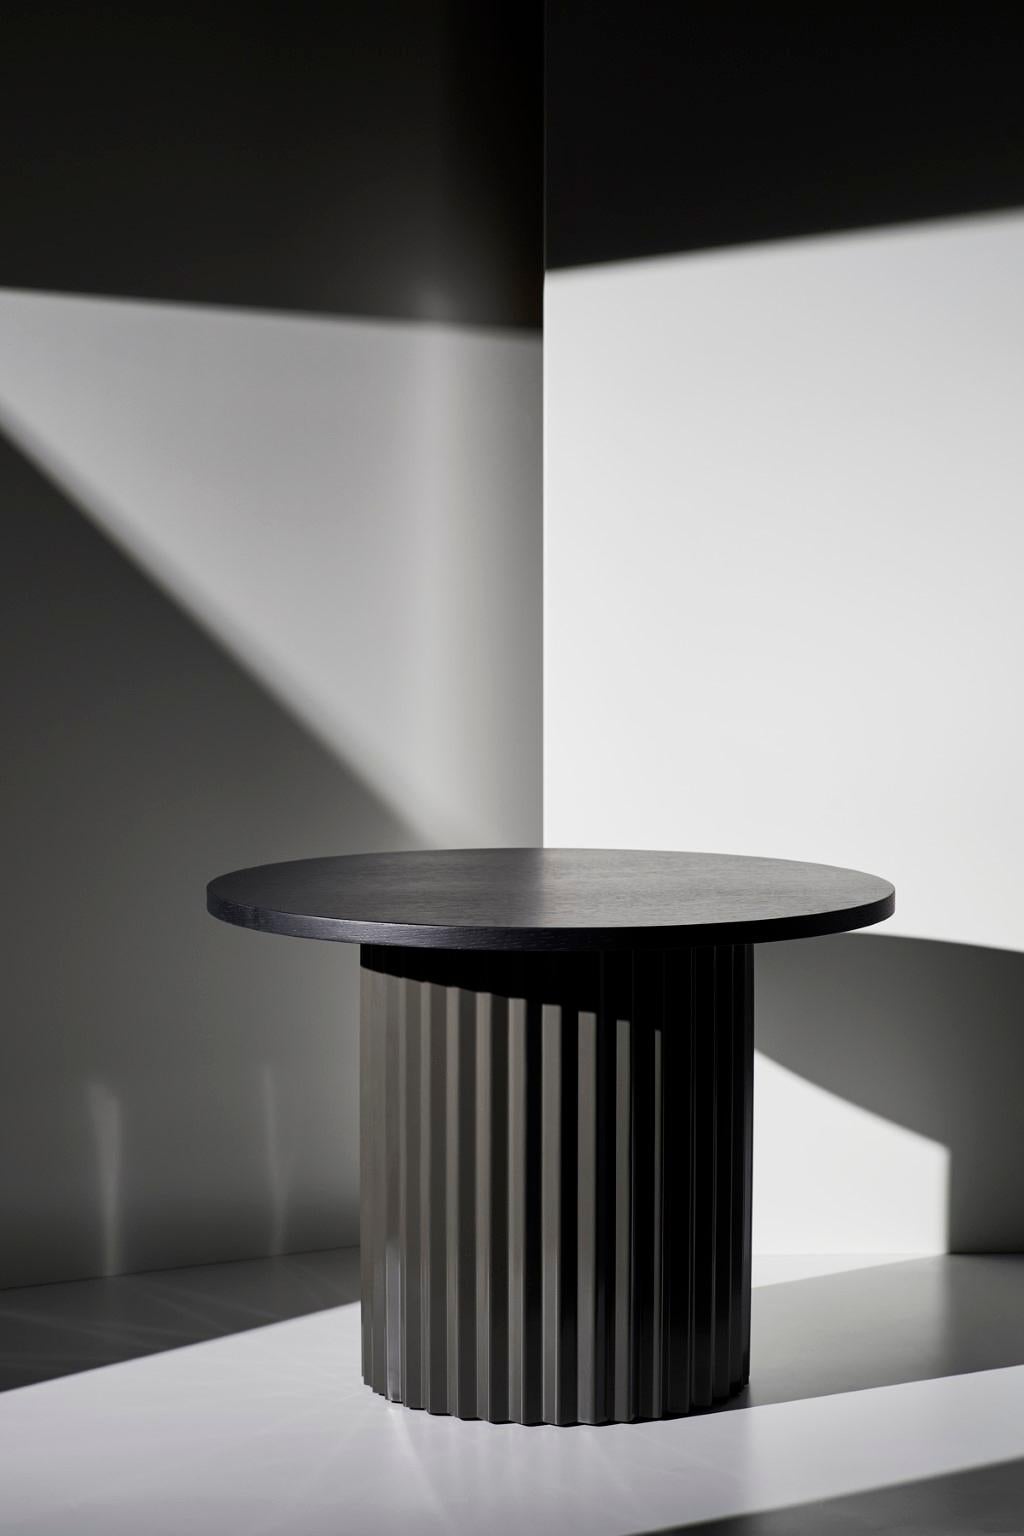 Set of 2 marble tables by Lisette Rützou
Dimensions: 
D 60 x H 41 cm
D 40 x H 41 cm
Materials: Marble tabletop, Brass Column


 Lisette Rützou’s design is motivated by an urge to articulate a story. Inspired by the beauty of materials, form